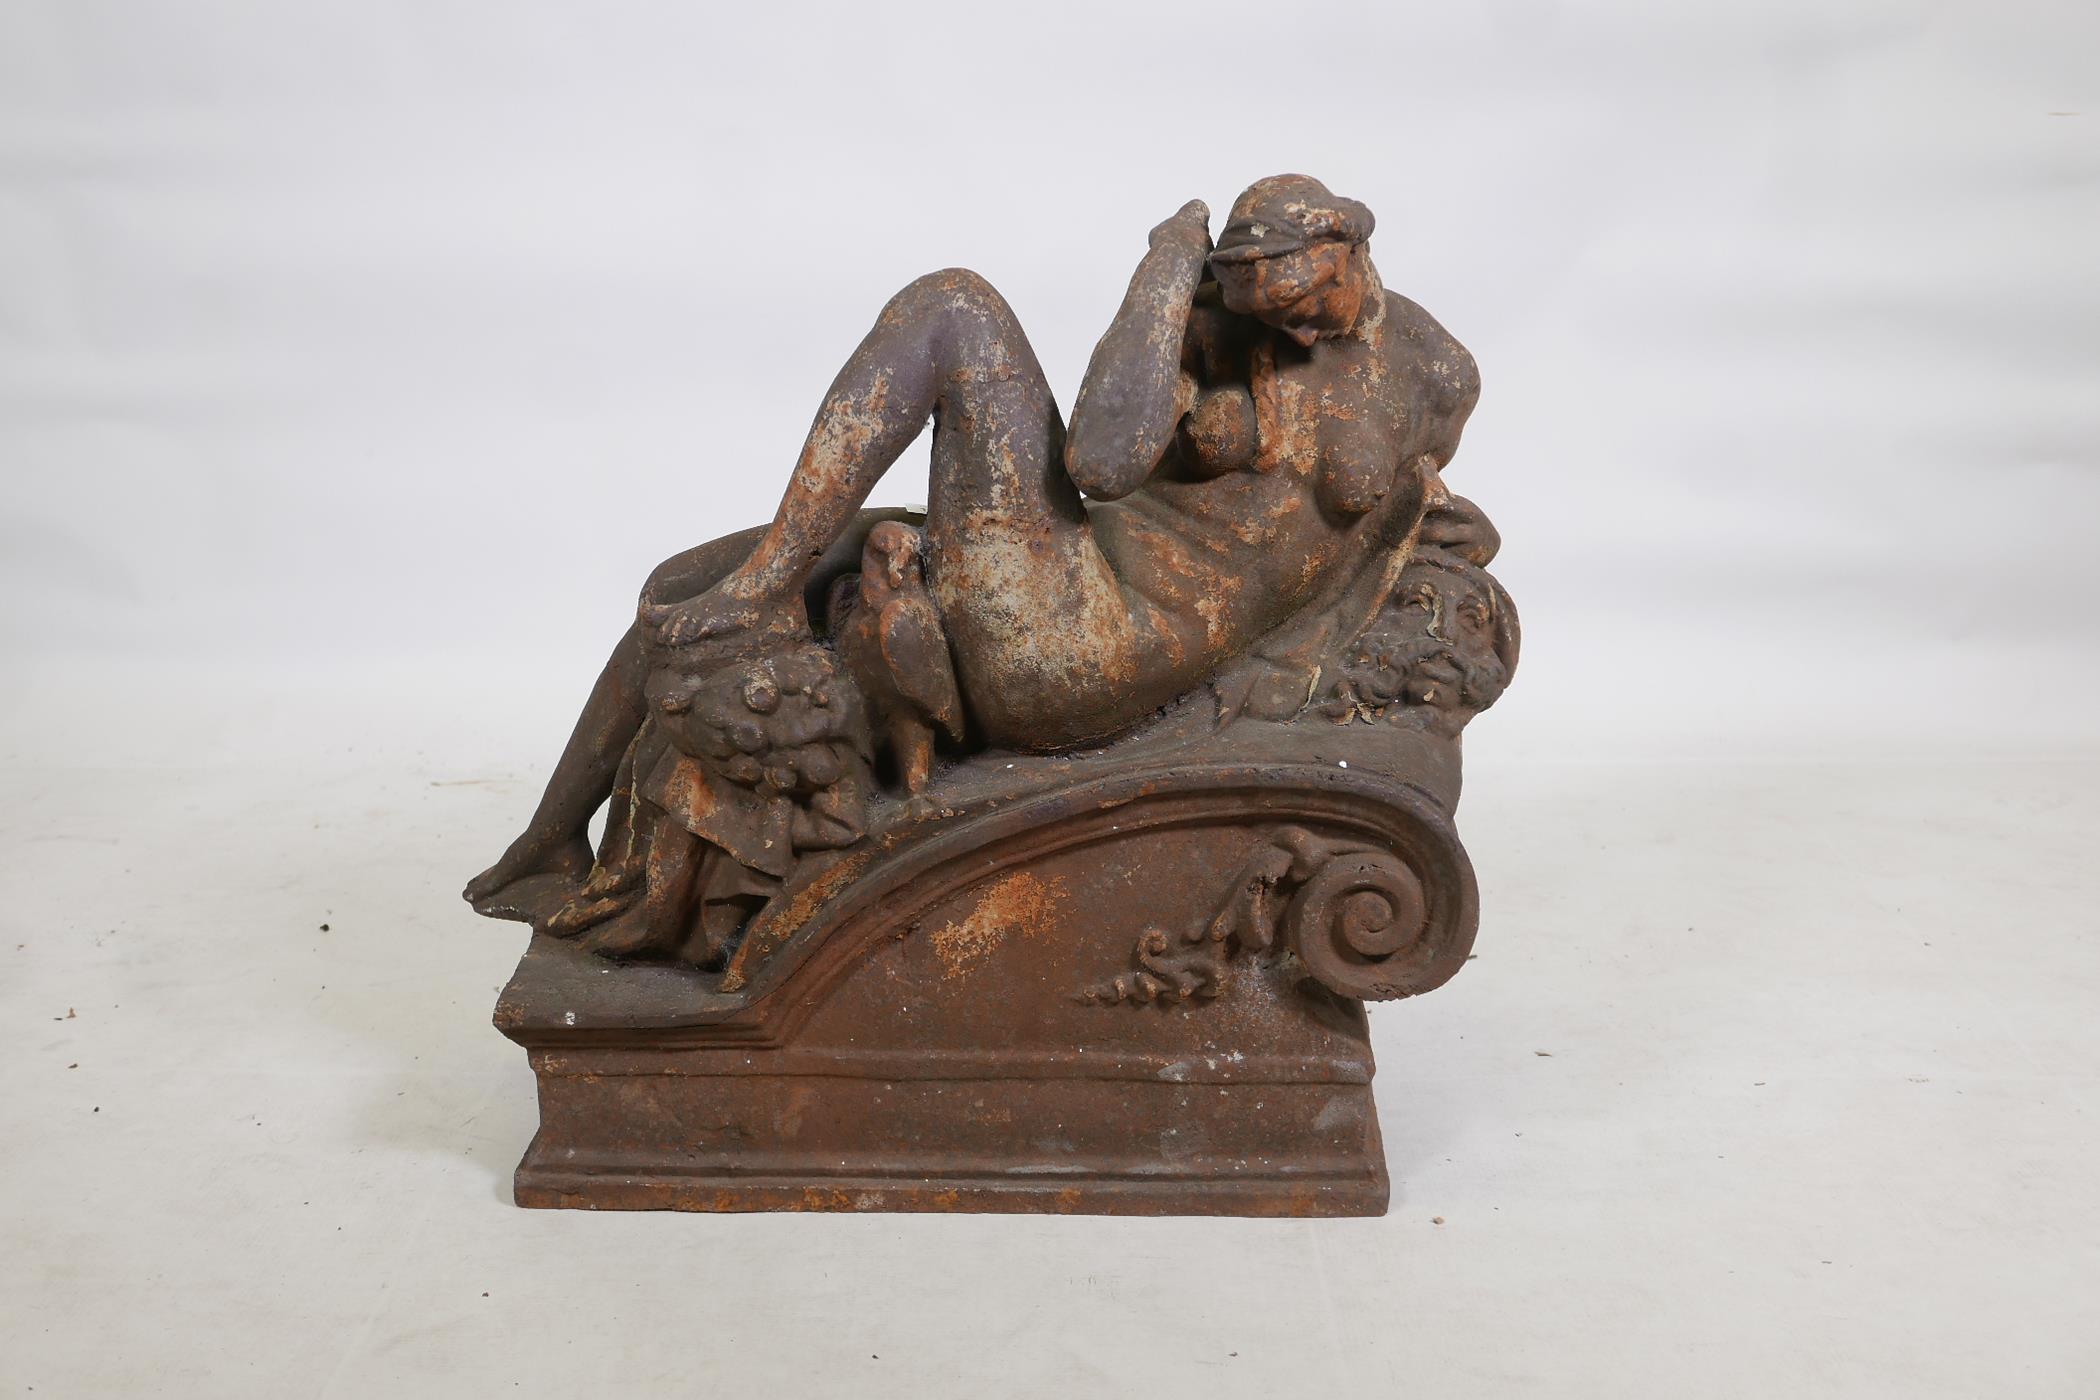 An early C19th hollow cast iron architectural feature in the form of a classical nude, remnants of